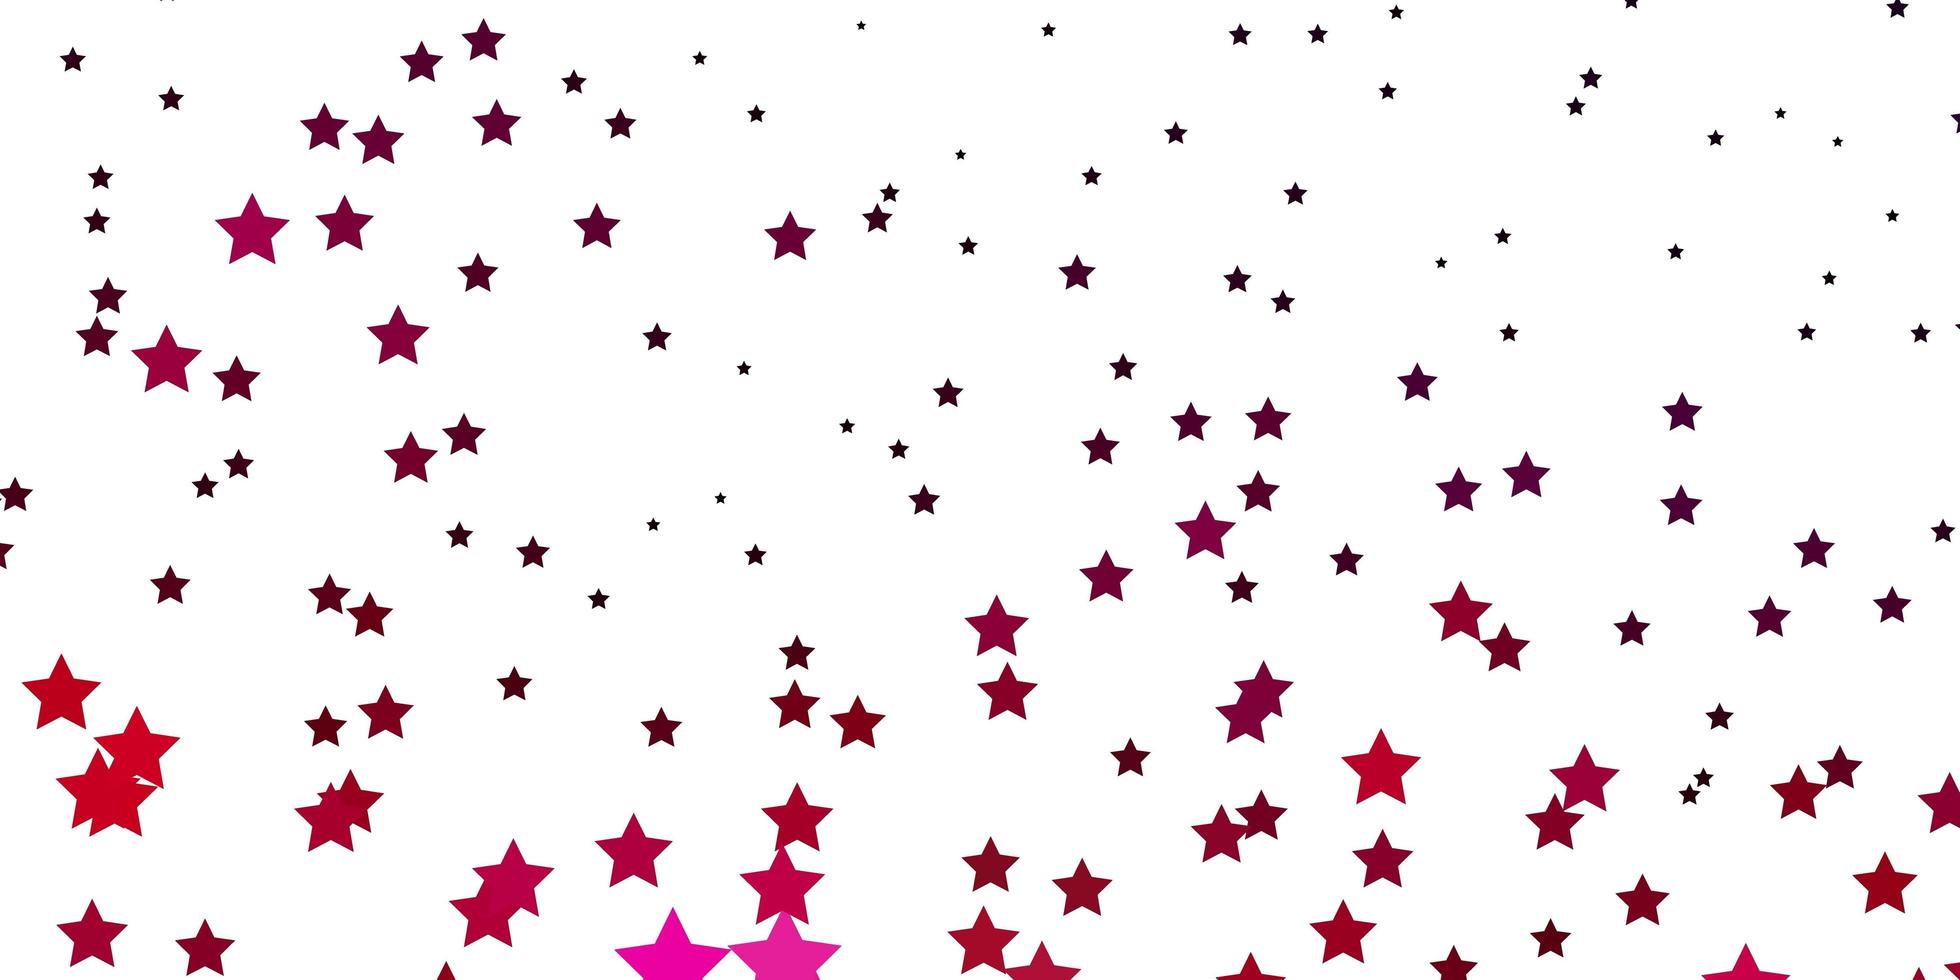 Light Pink vector background with colorful stars Colorful illustration in abstract style with gradient stars Pattern for new year ad booklets